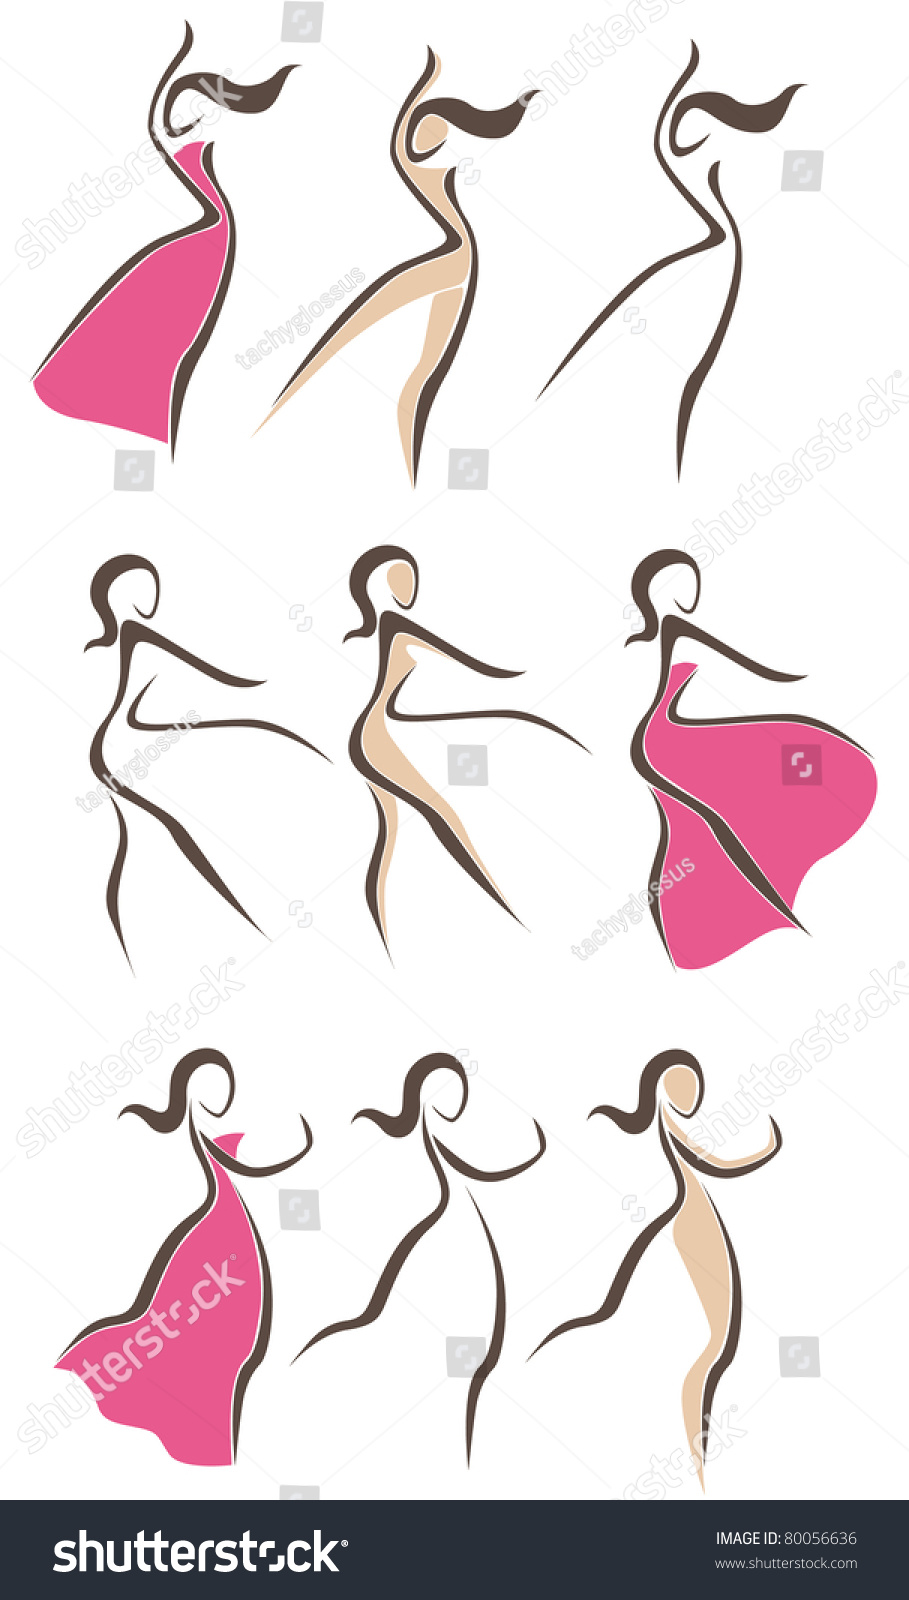 Vector Image Of Girls And The The Dress For Dance - 80056636 : Shutterstock